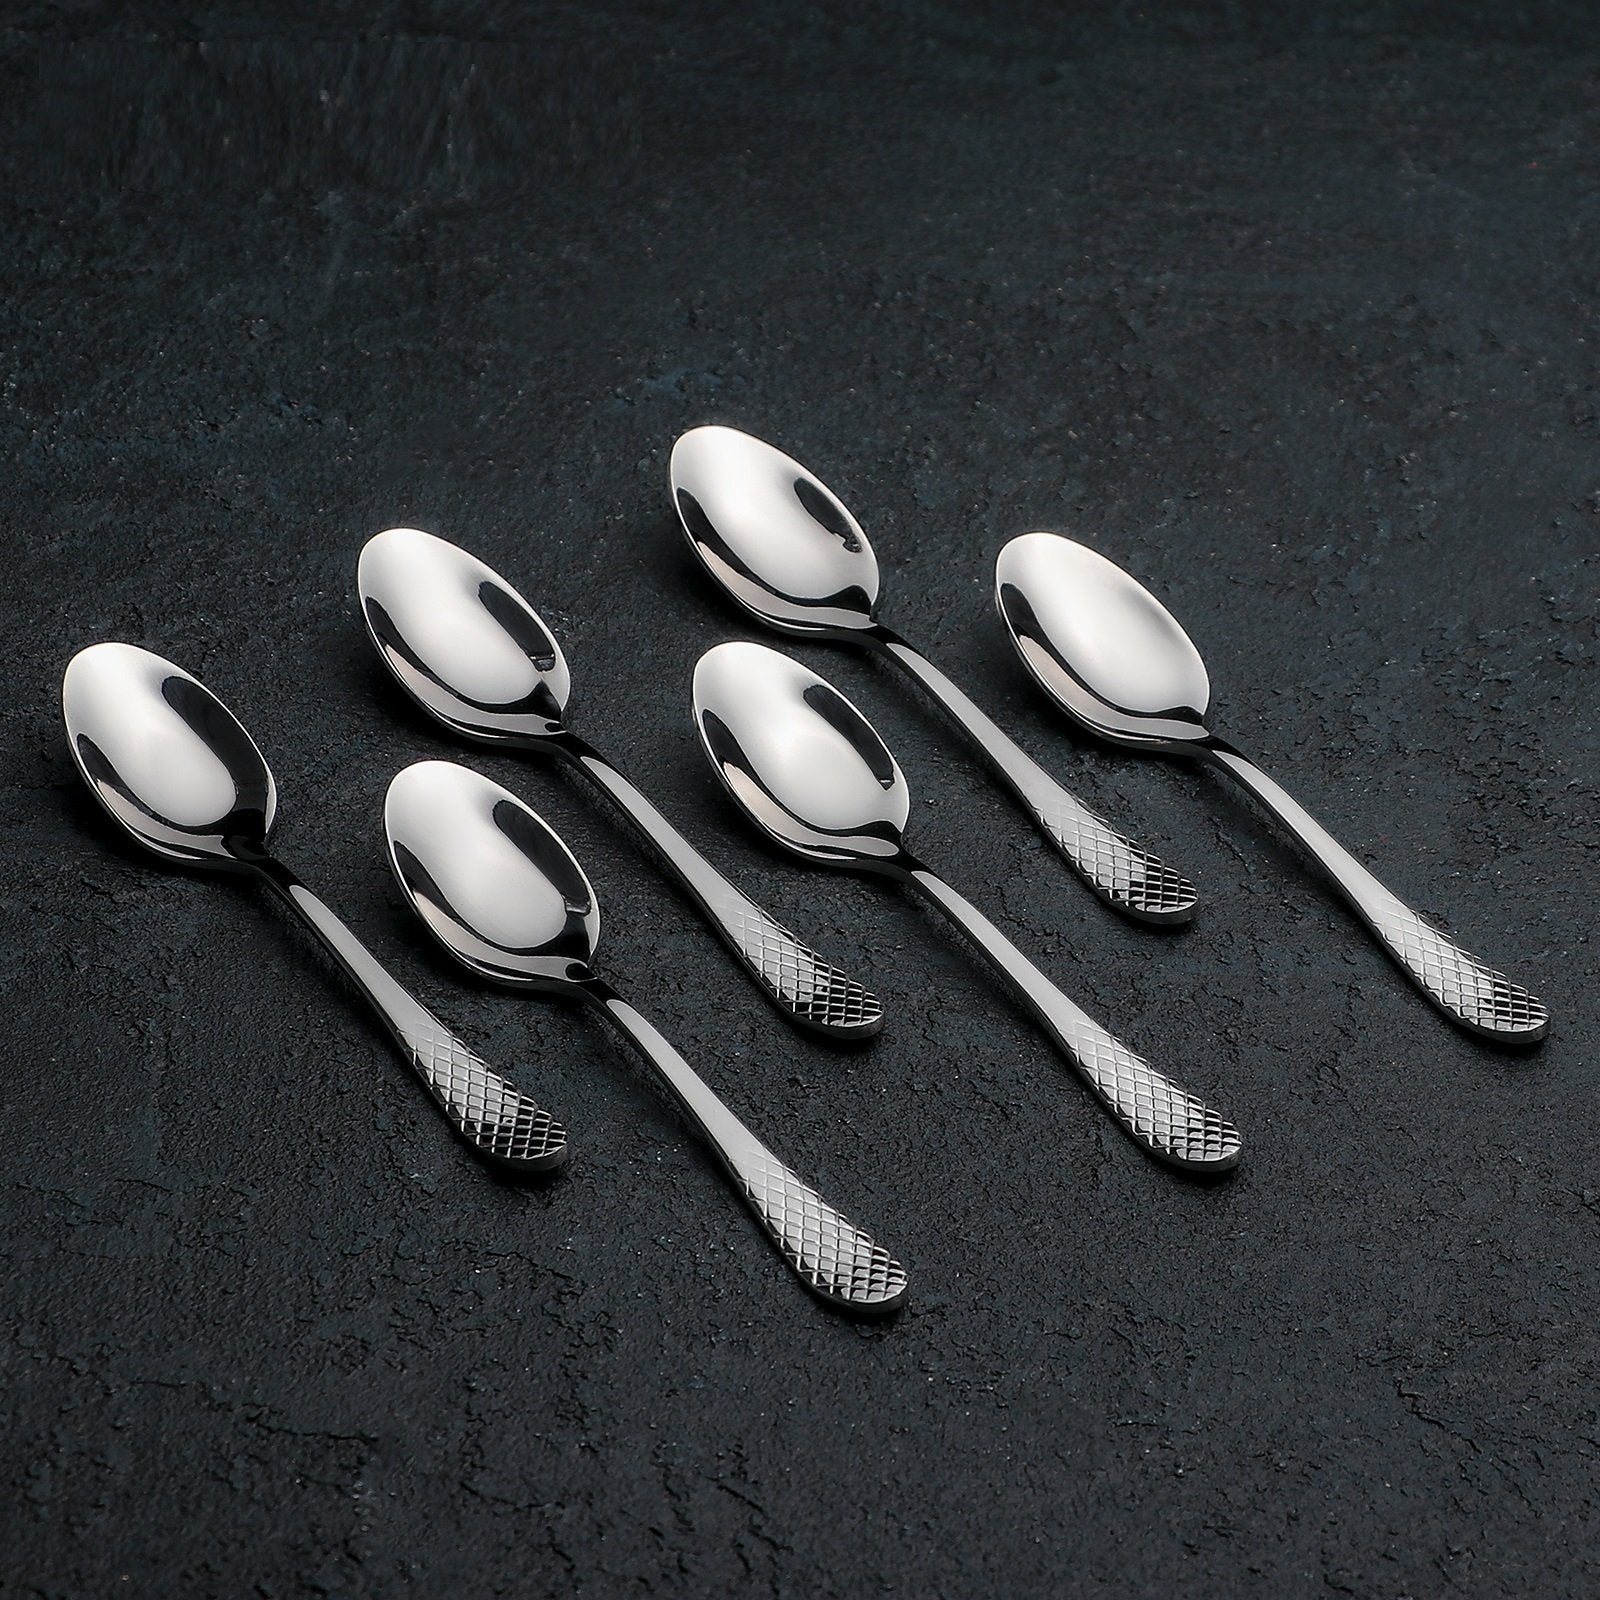 [D **] Coffee Spoon 4.5" | 11.5 Cmset Of 6 In Gift Box WL-999204/6C